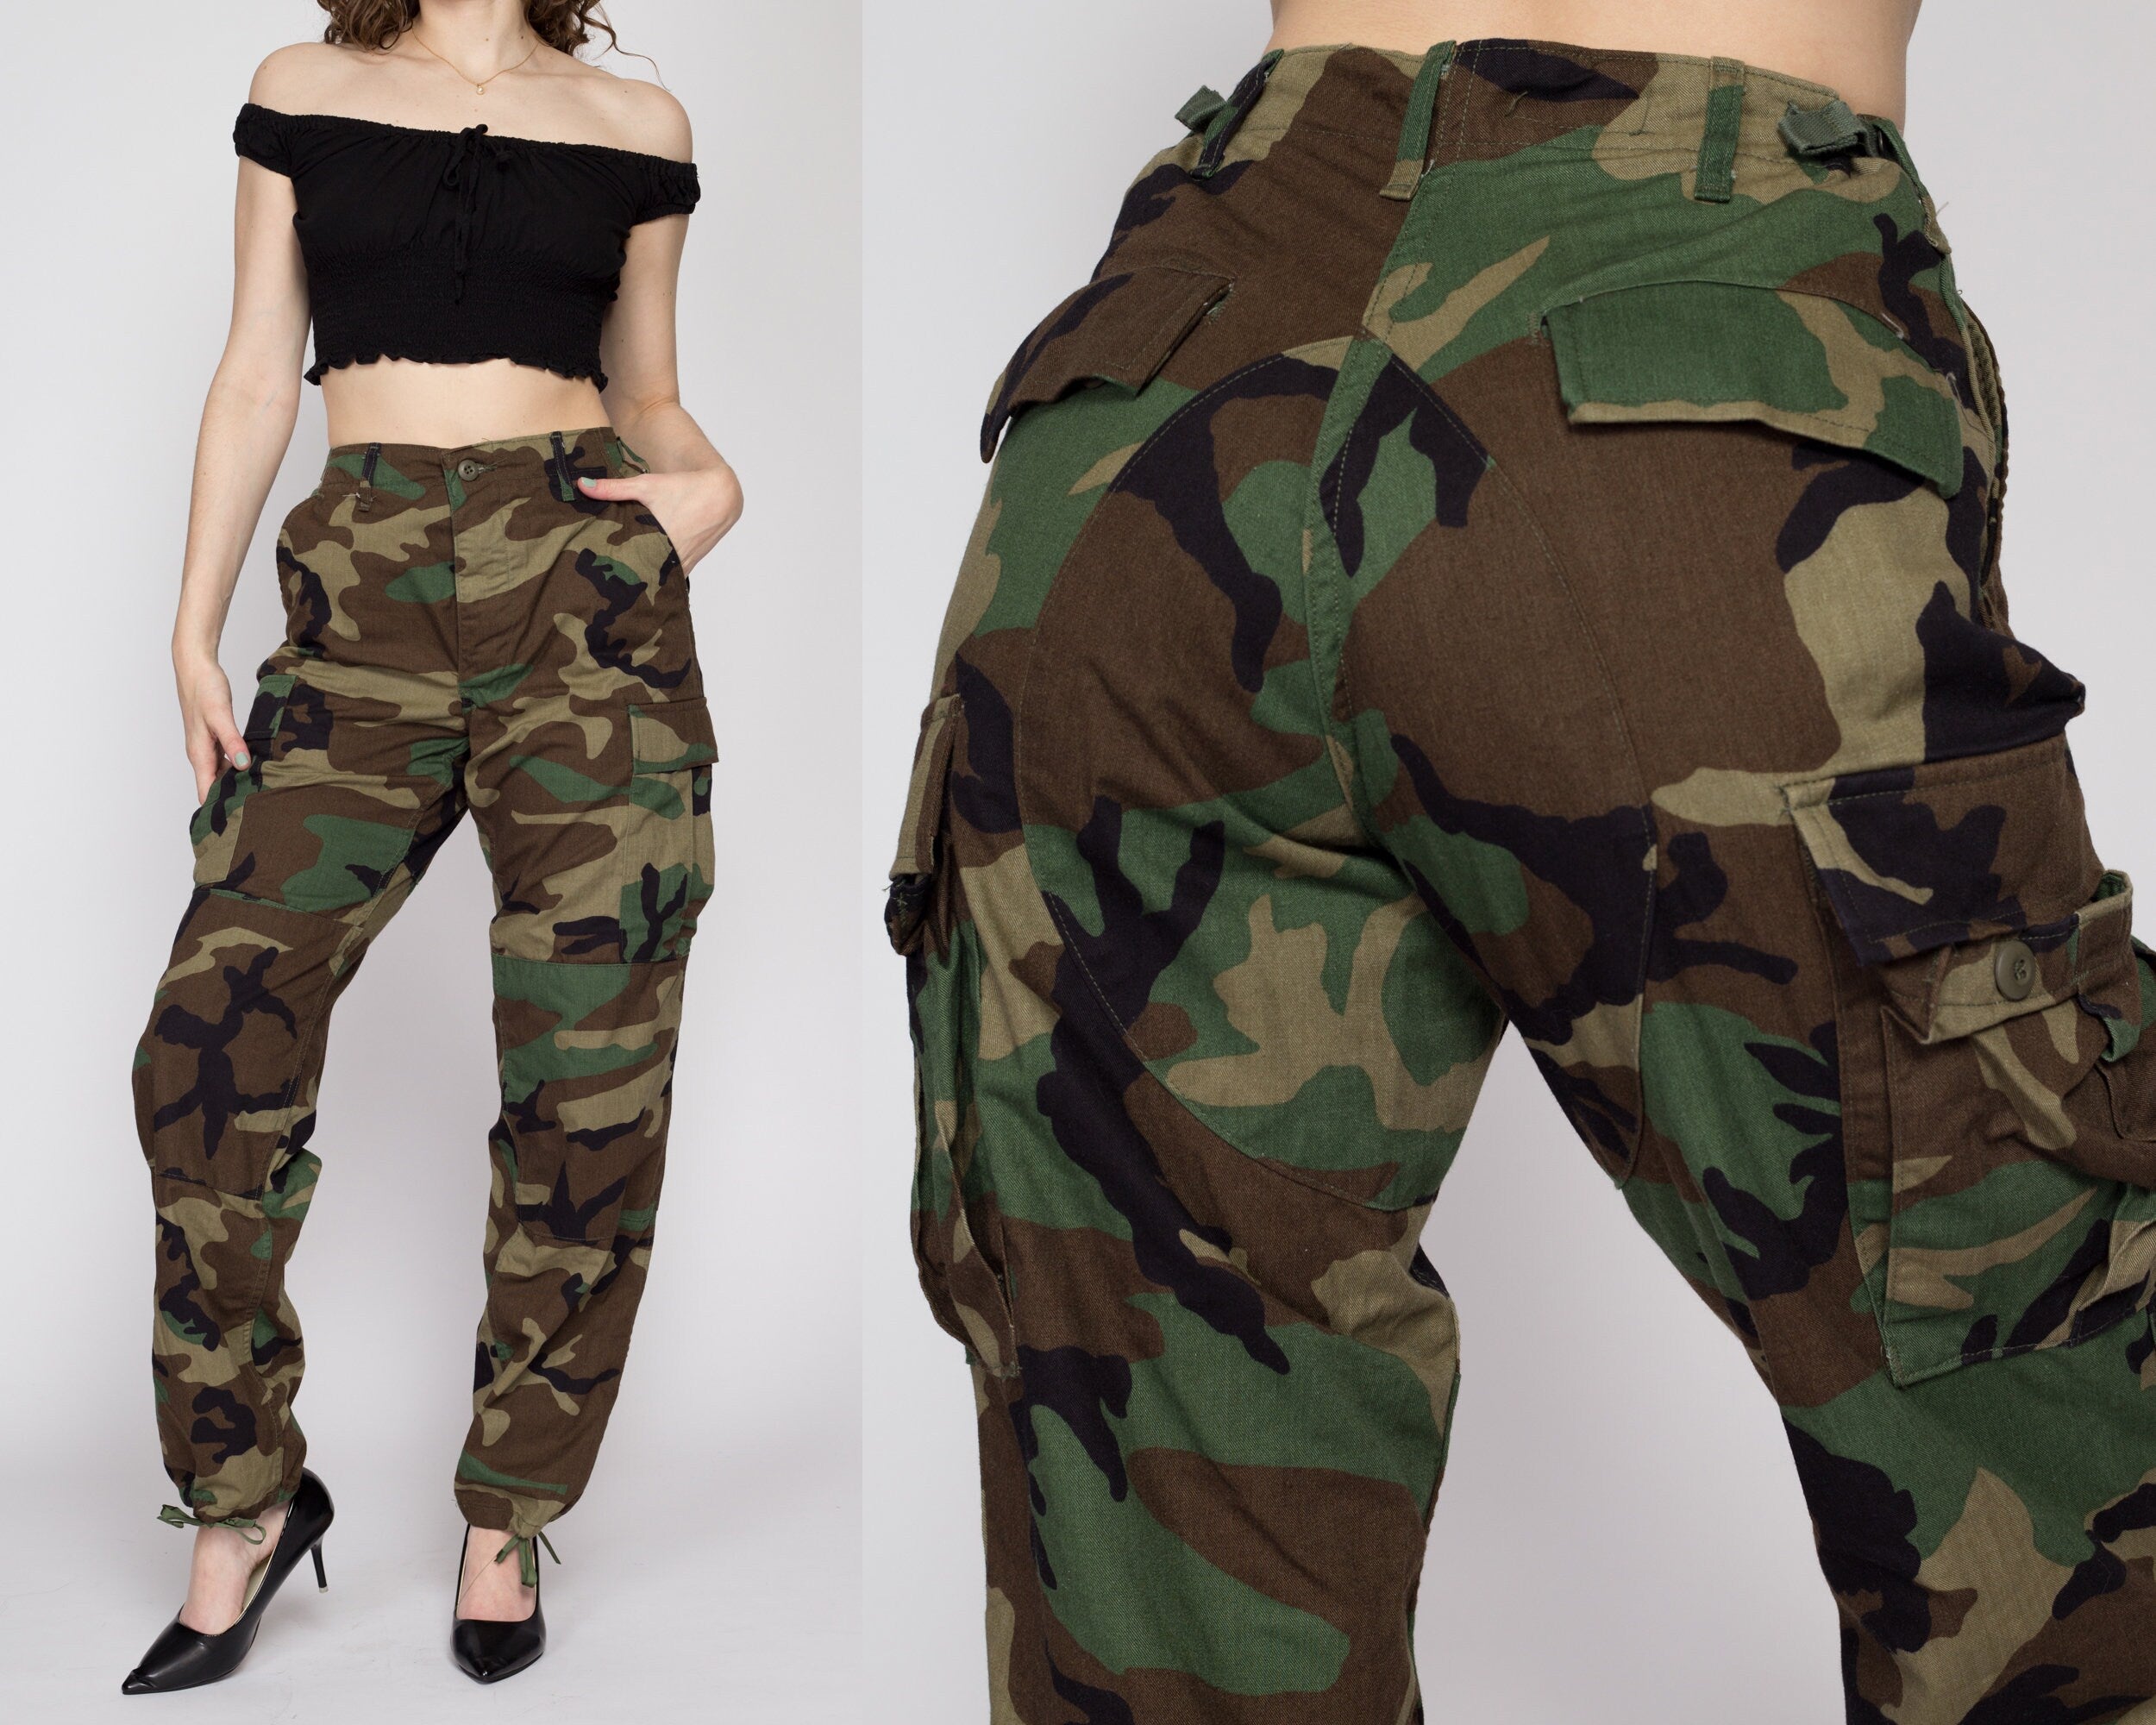 TCRAZY Women's Camo Cargo Pants High Waist Slim Fit Trousers Camouflage  Active Jogger Pocket Sweatpants with Belt XS at Amazon Women's Clothing  store